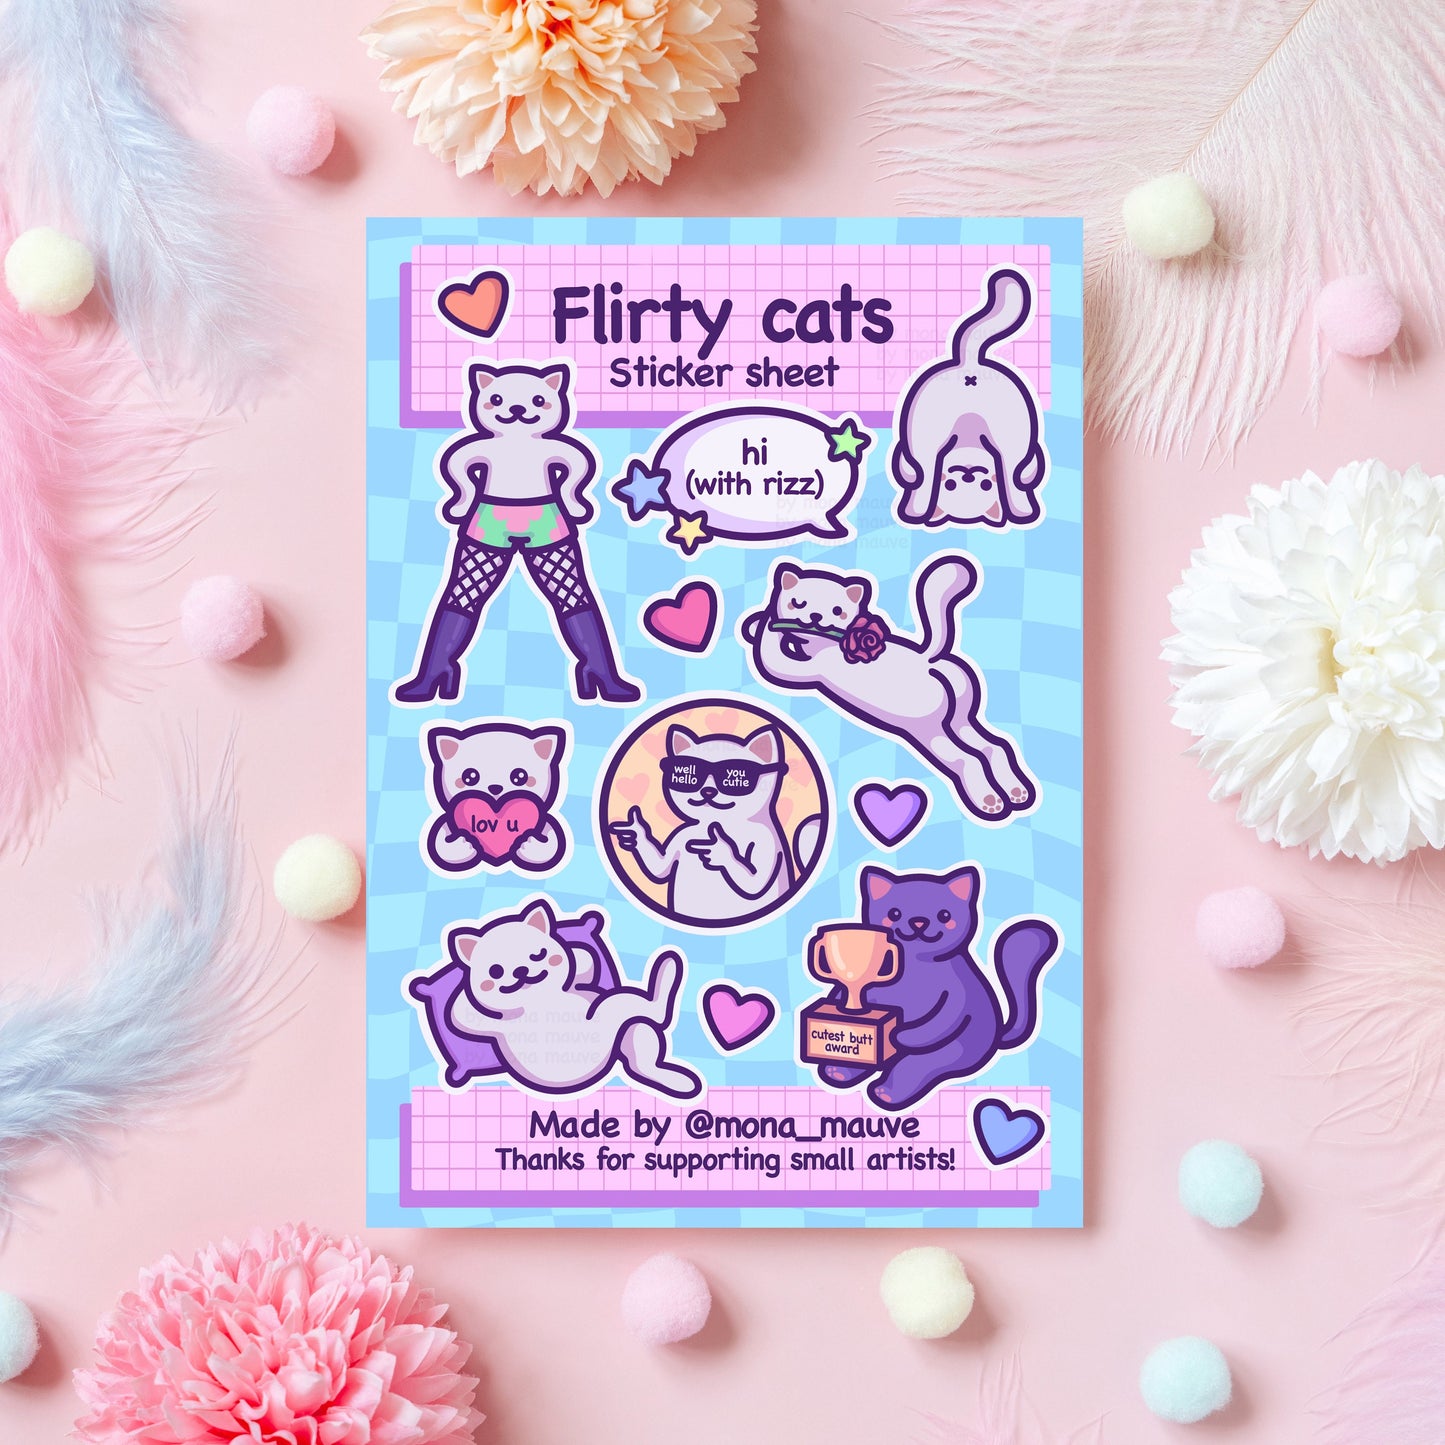 Flirty Cats Sticker Sheet | 8 Cute & Funny Recyclable Paper Stickers | Romantic and Humorous | Love You, Cutest Butt Award | A5